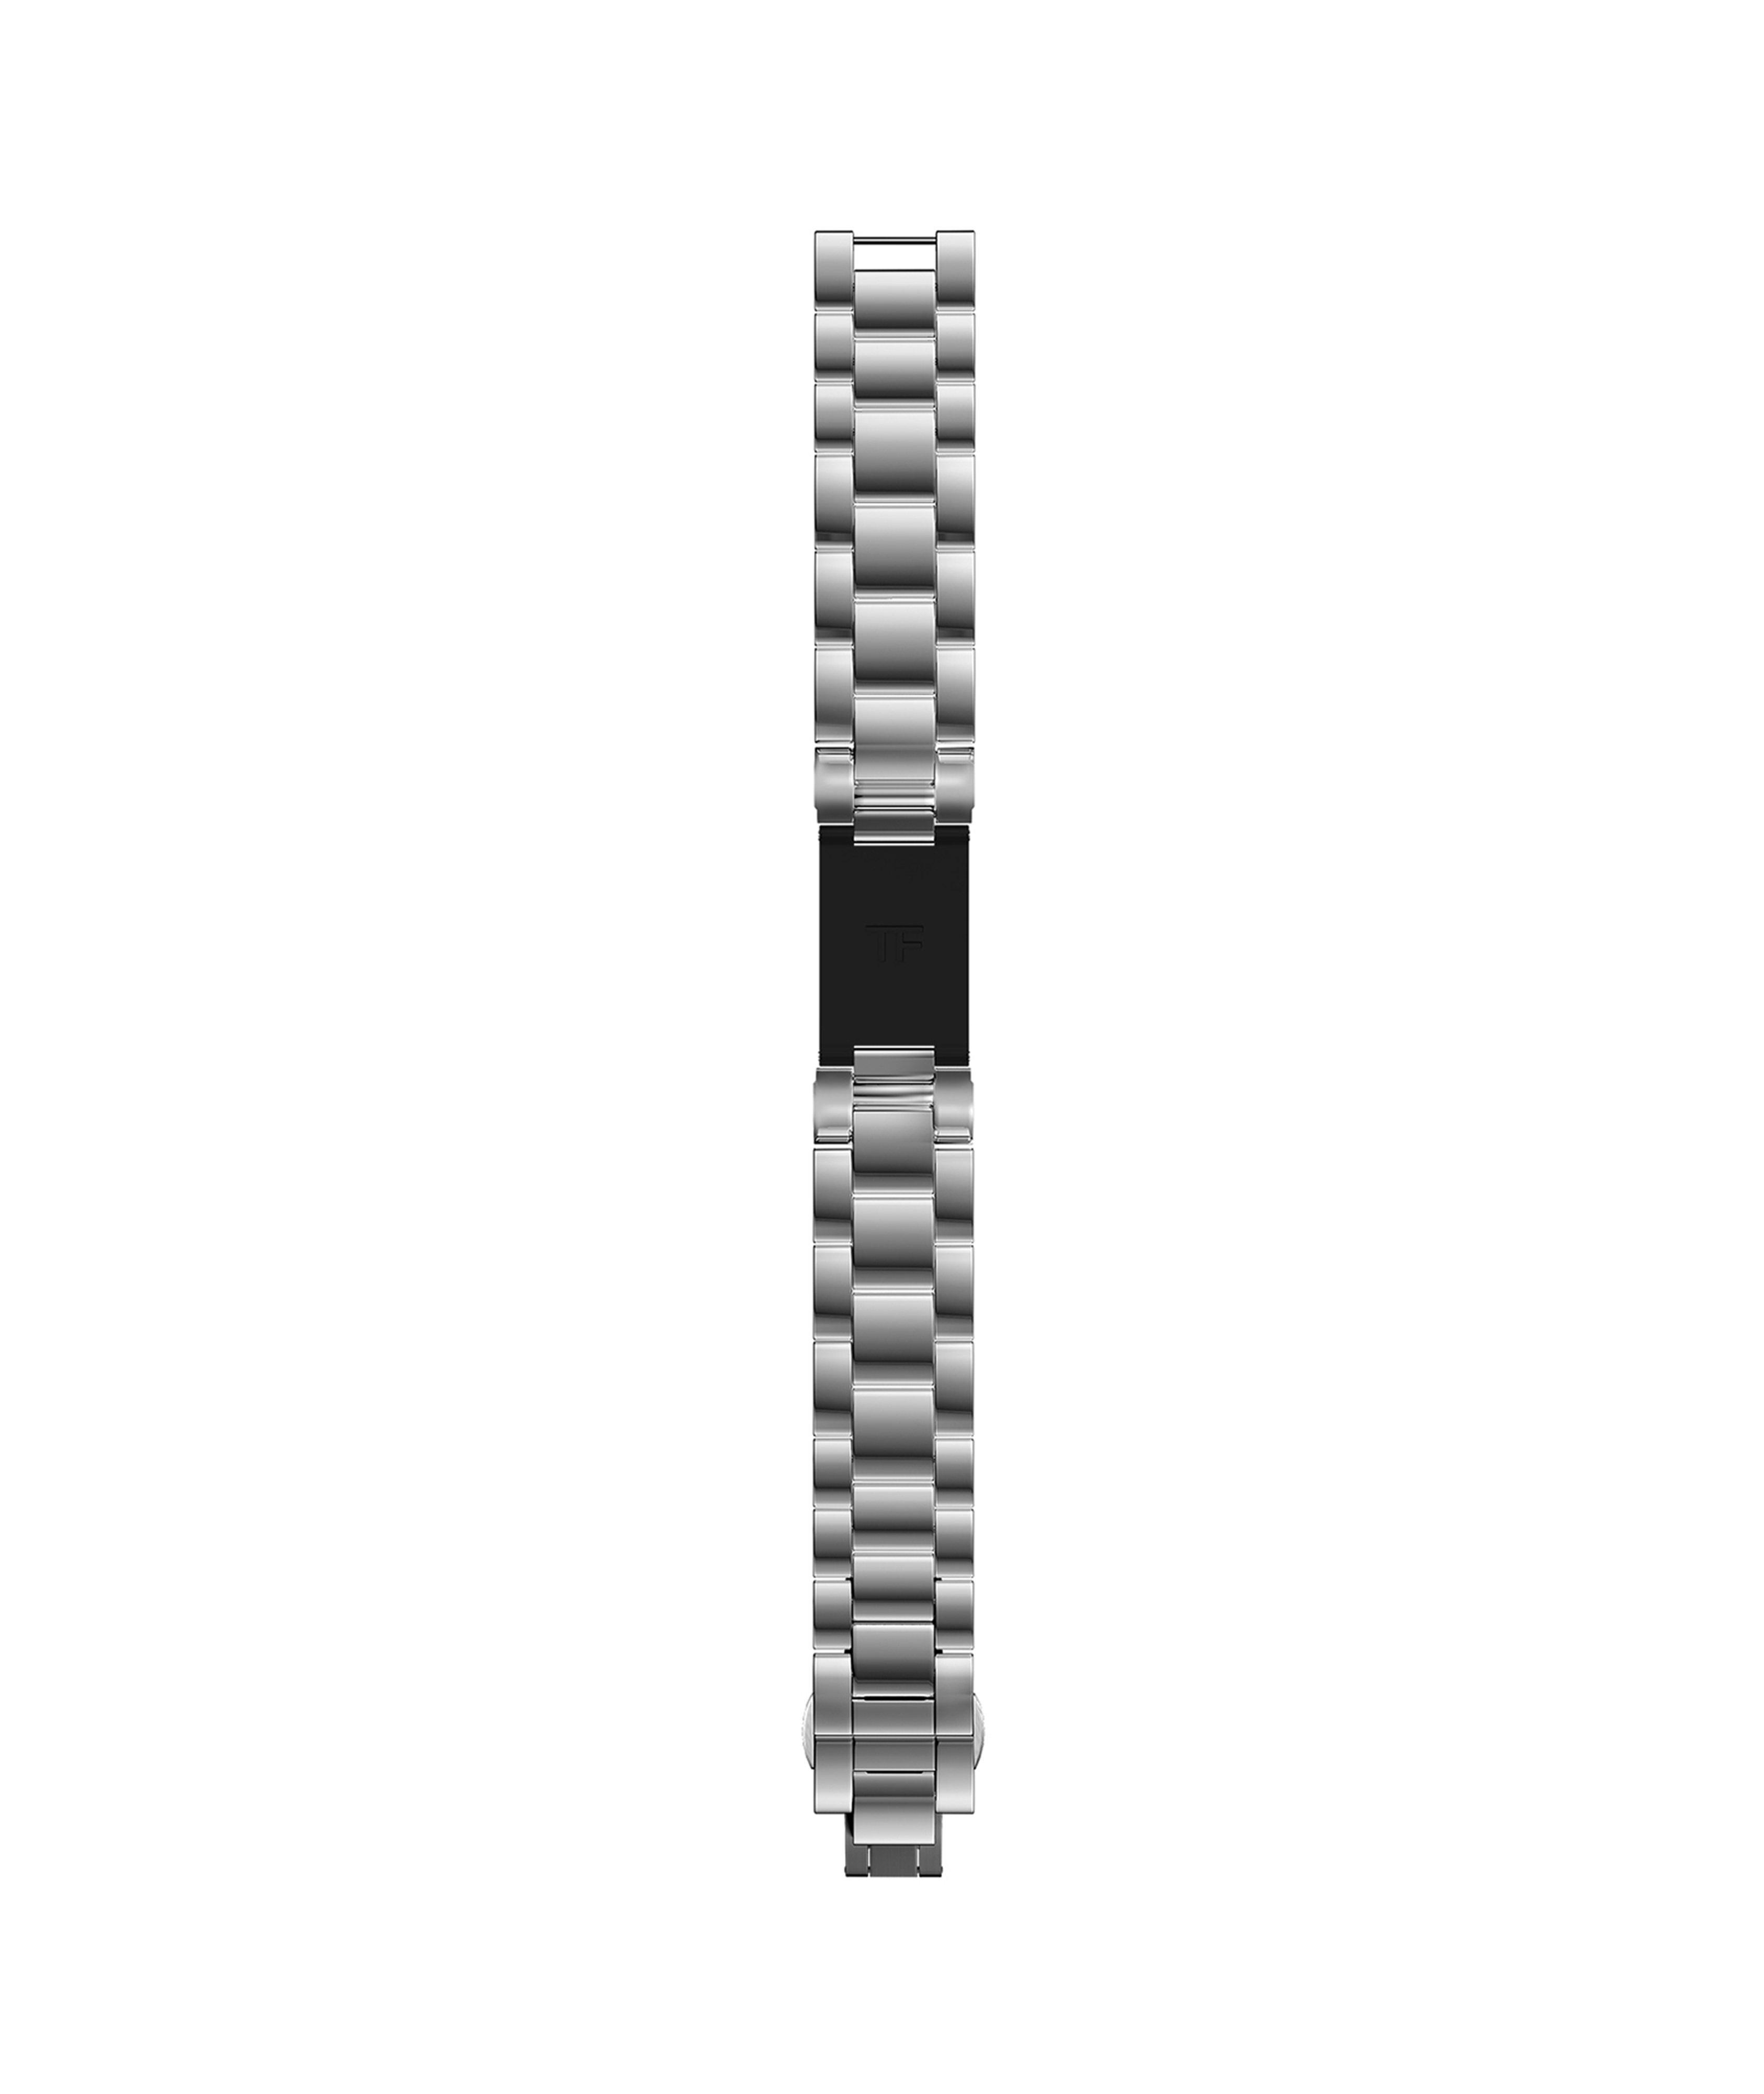 Harry Rosen Large No. 001 Polished Stainless Steel Three-link Bracelet Watch Strap. 1